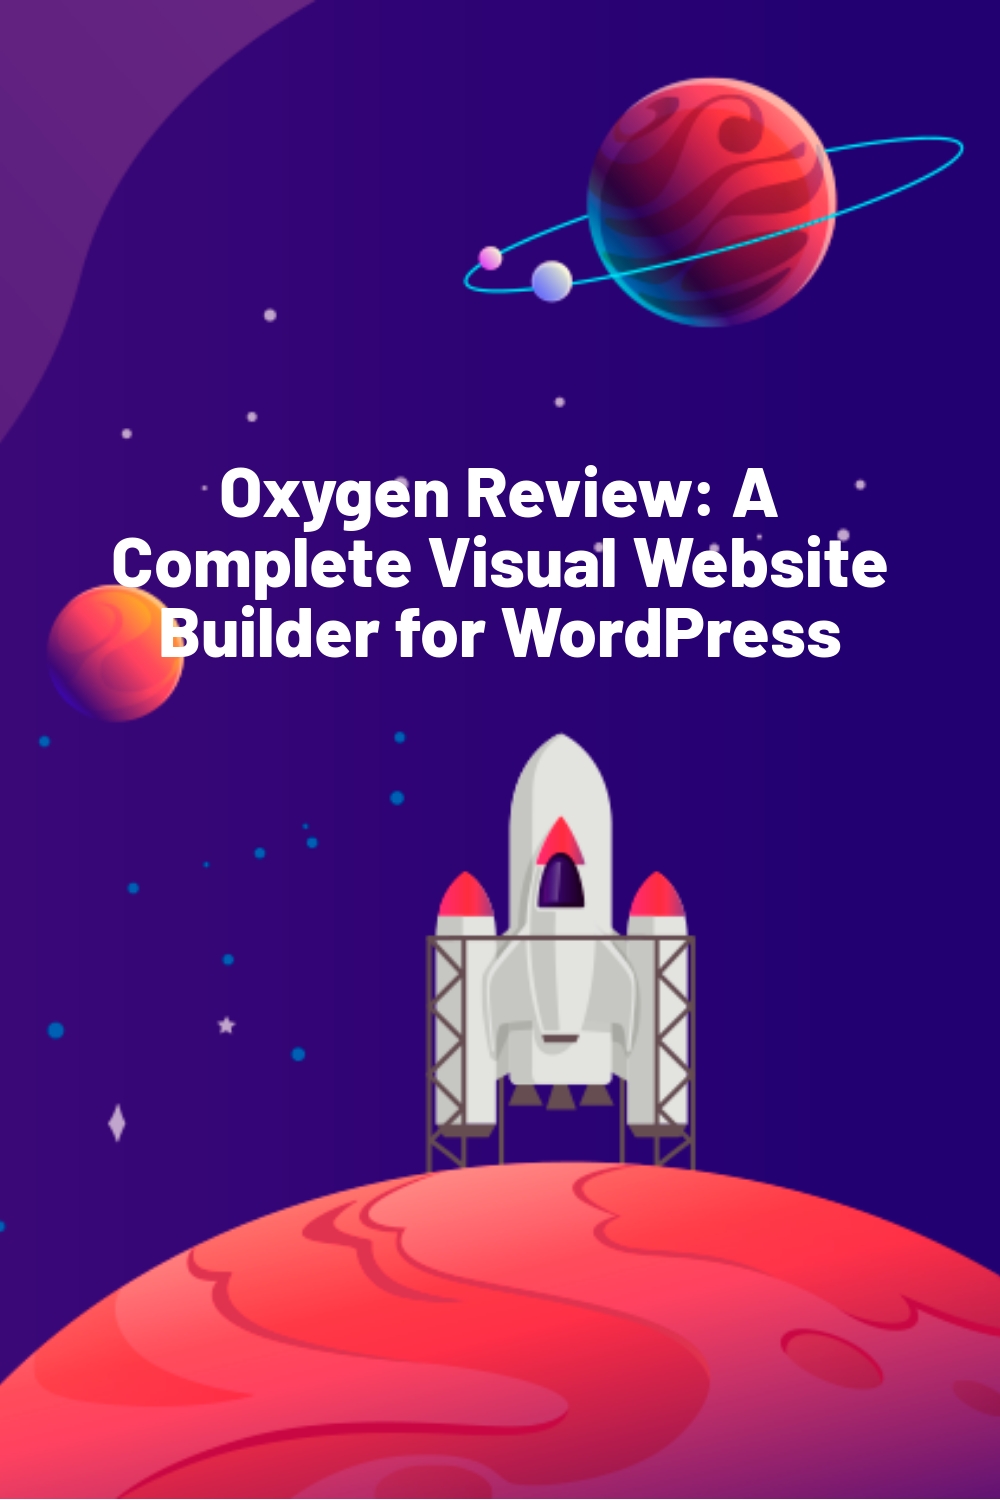 Oxygen Review: A Complete Visual Website Builder for WordPress